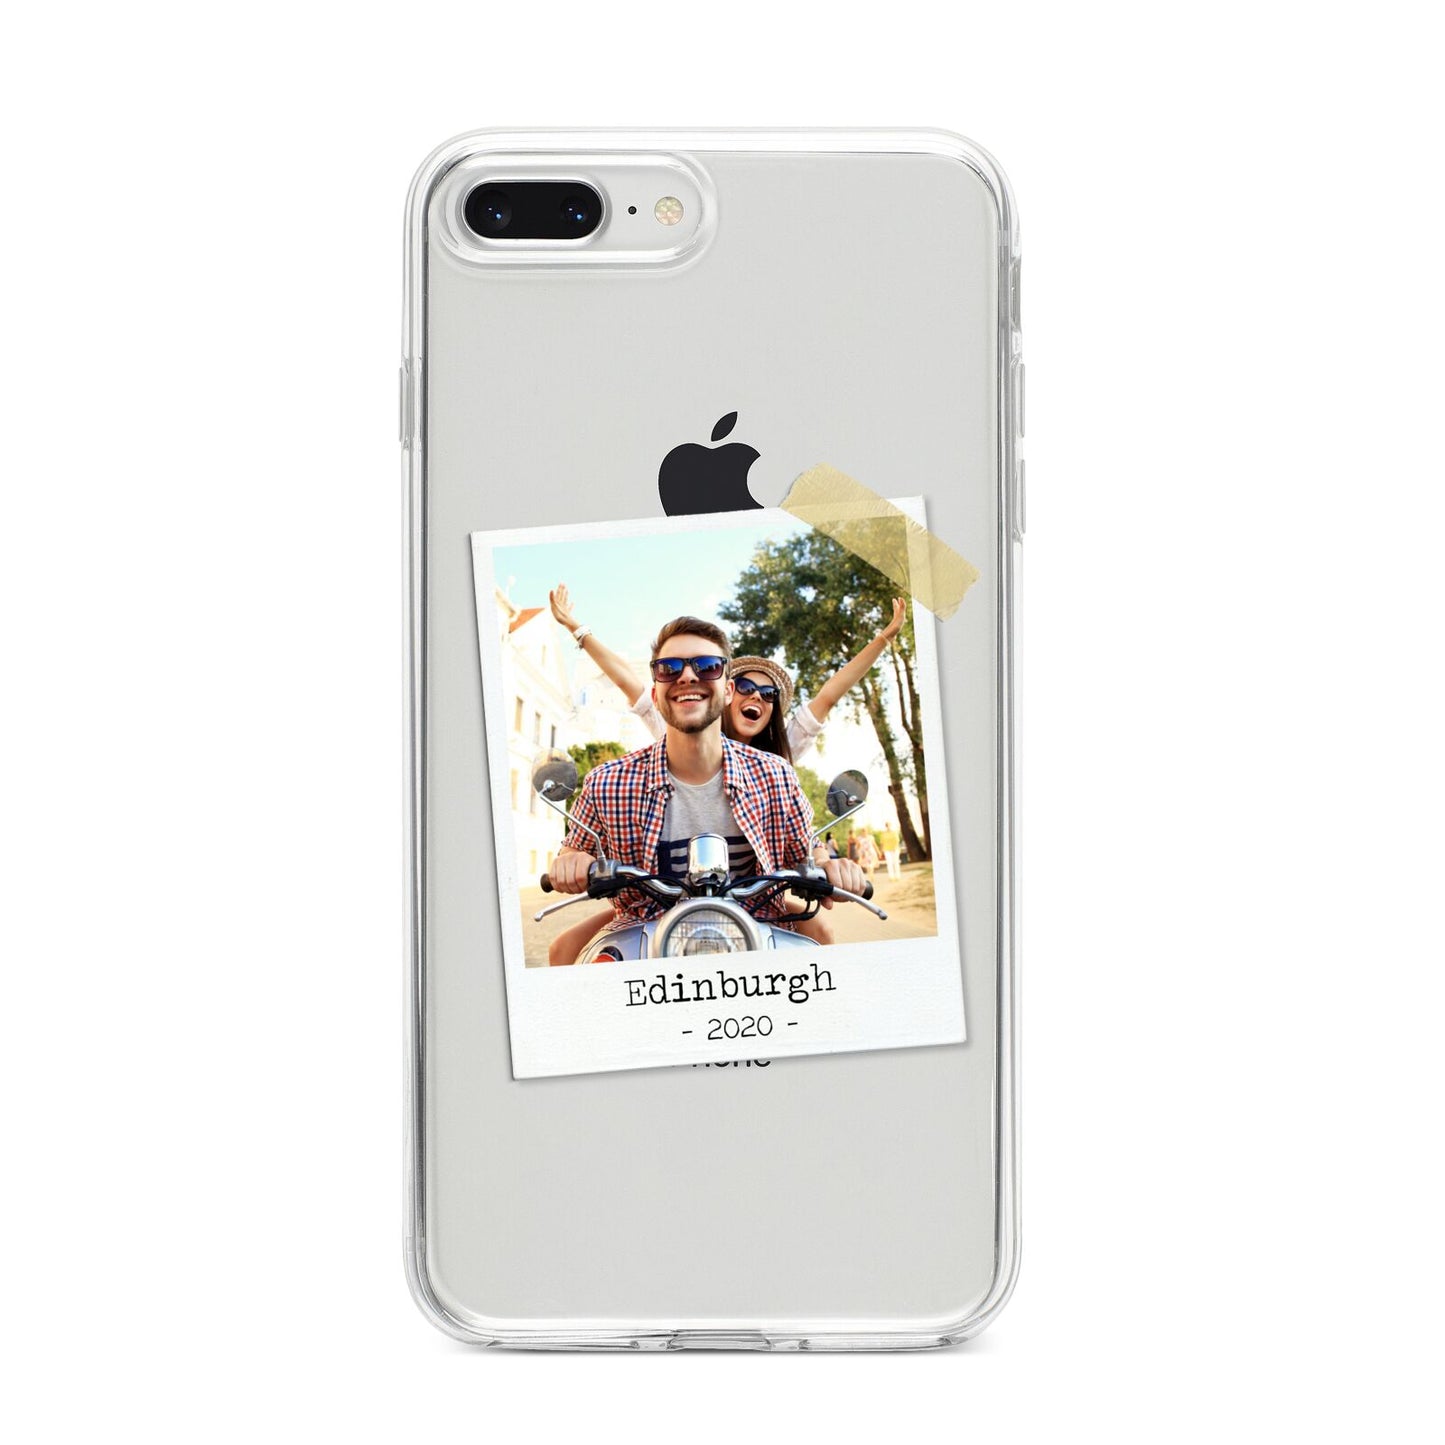 Taped Holiday Snap Photo Upload iPhone 8 Plus Bumper Case on Silver iPhone